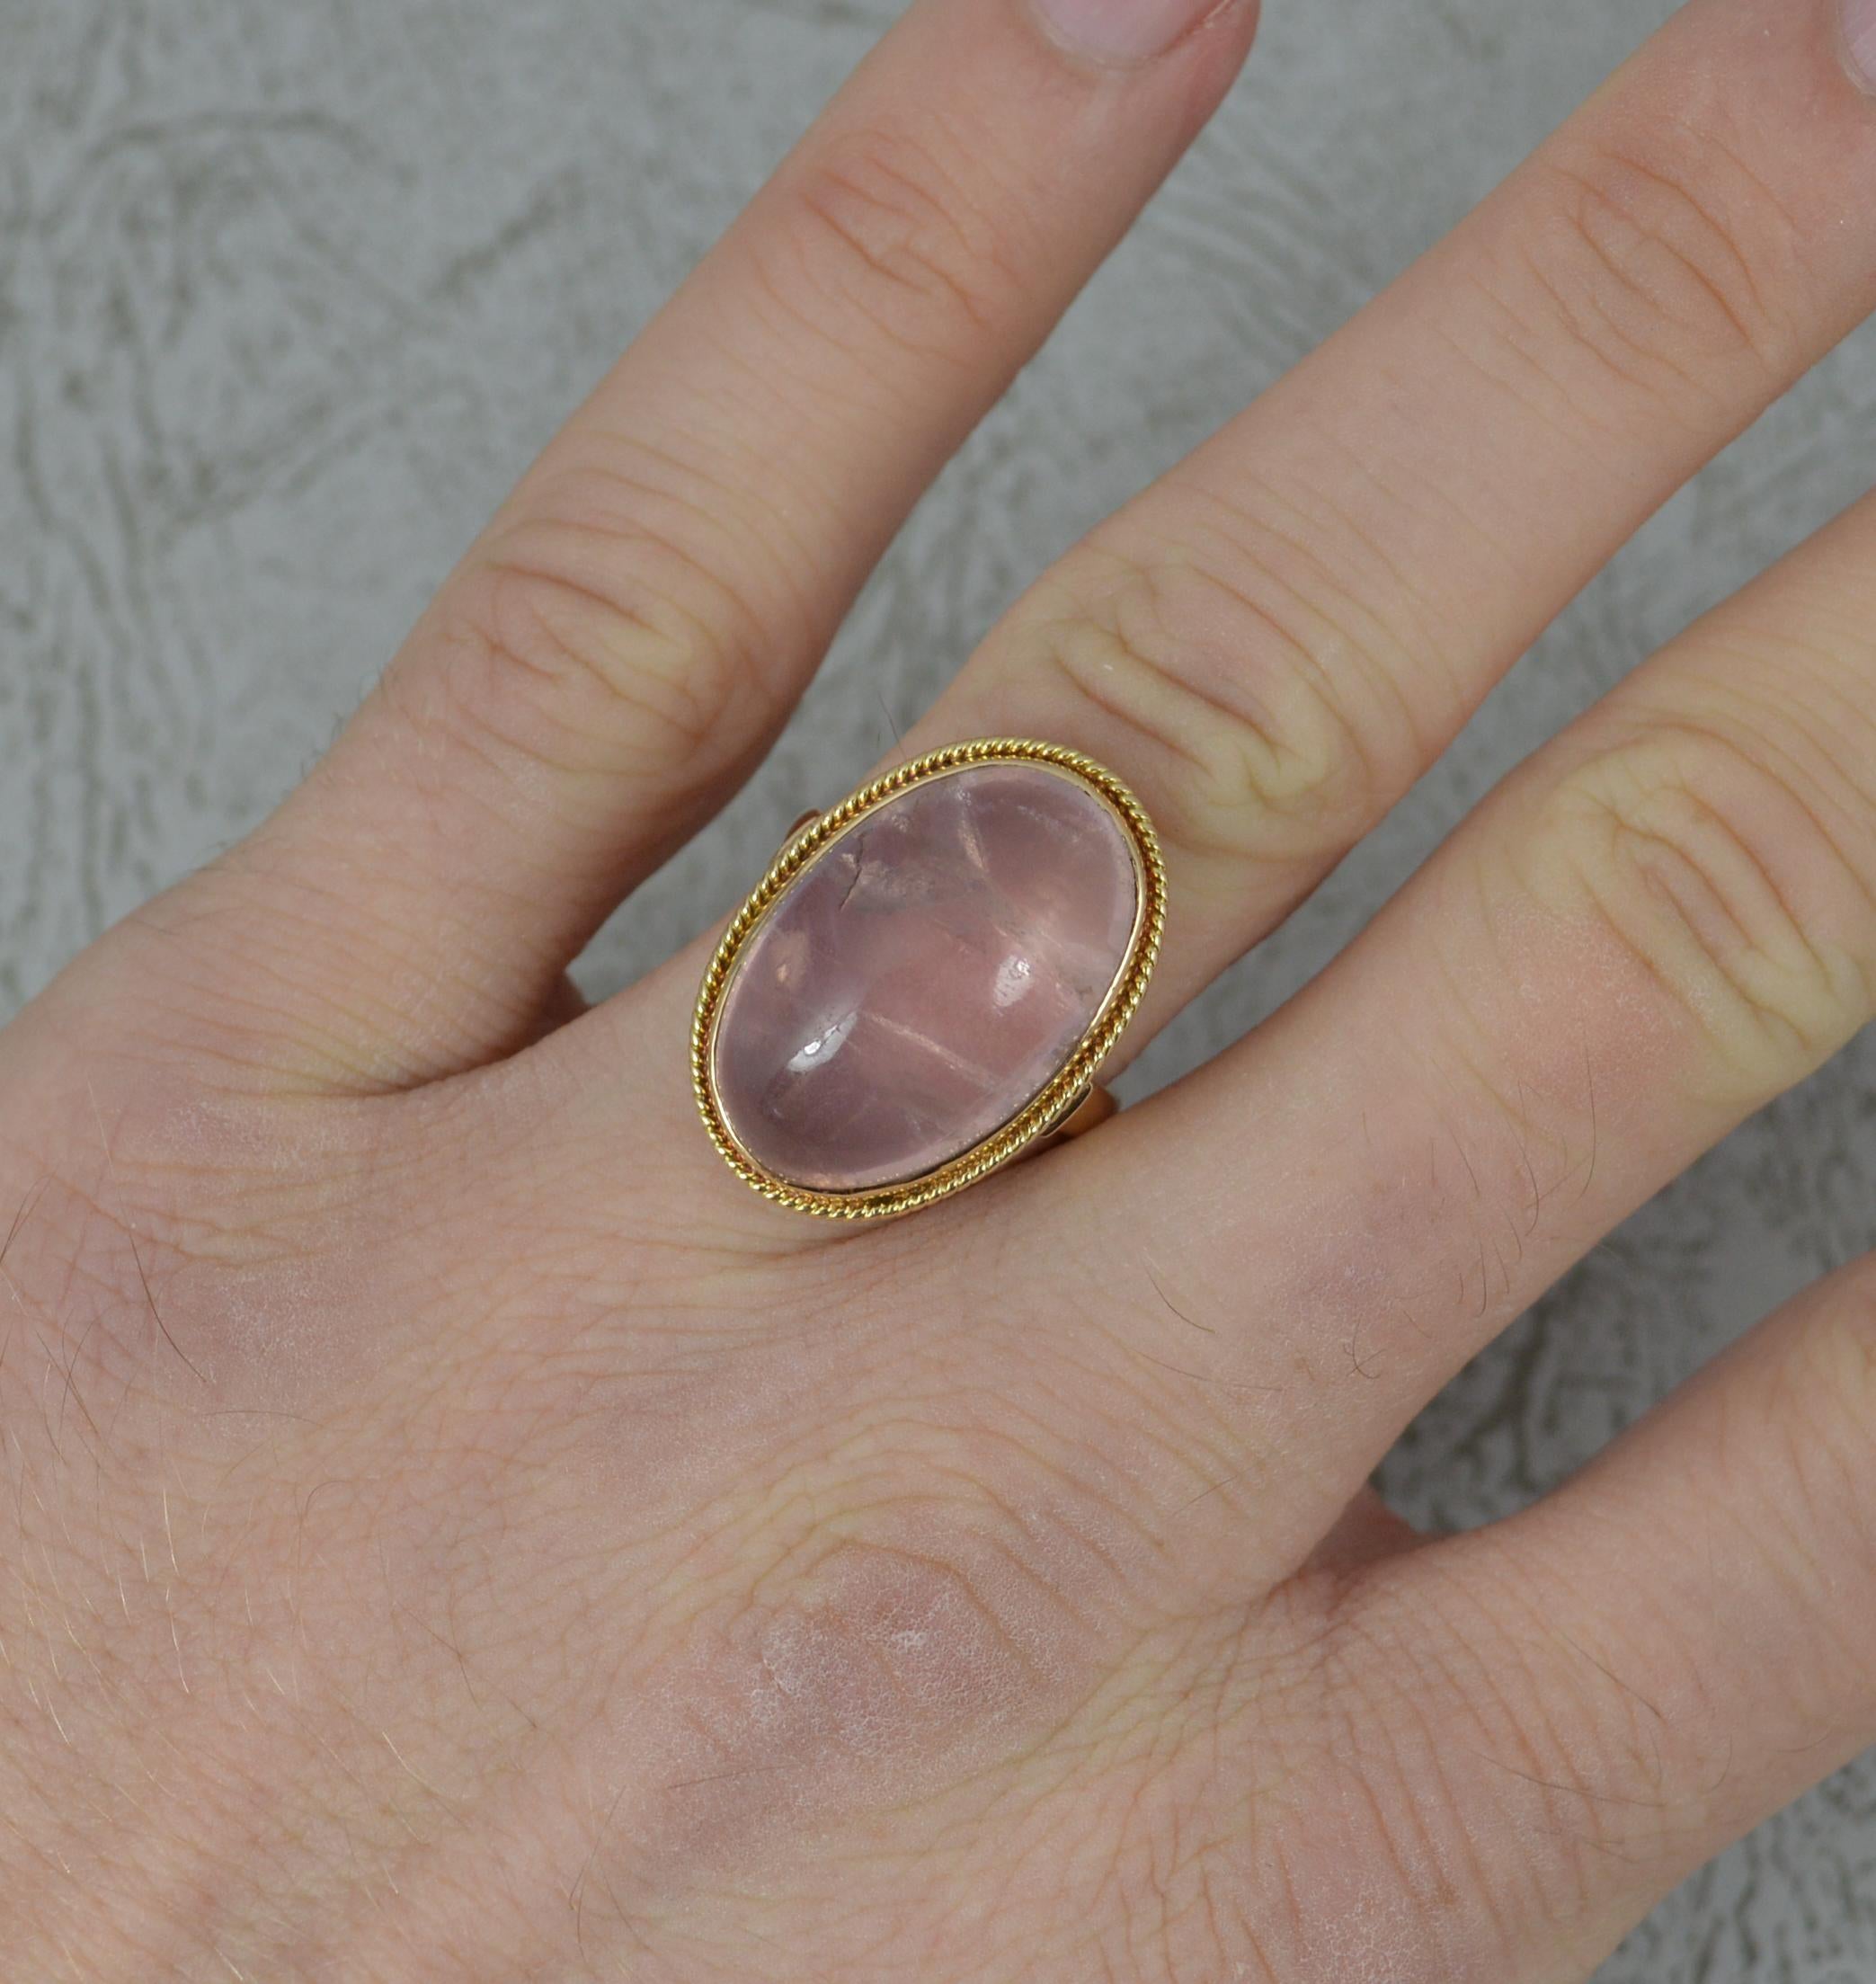 A beautiful ladies 14 carat gold and rose quartz ring.
20mm x 14mm rose quartz in bezel setting with a fine pierced cage.
Fine statement example.

Condition ; Excellent. Well set stone, some inclusions and a surface mark. Clean, strong, round band.